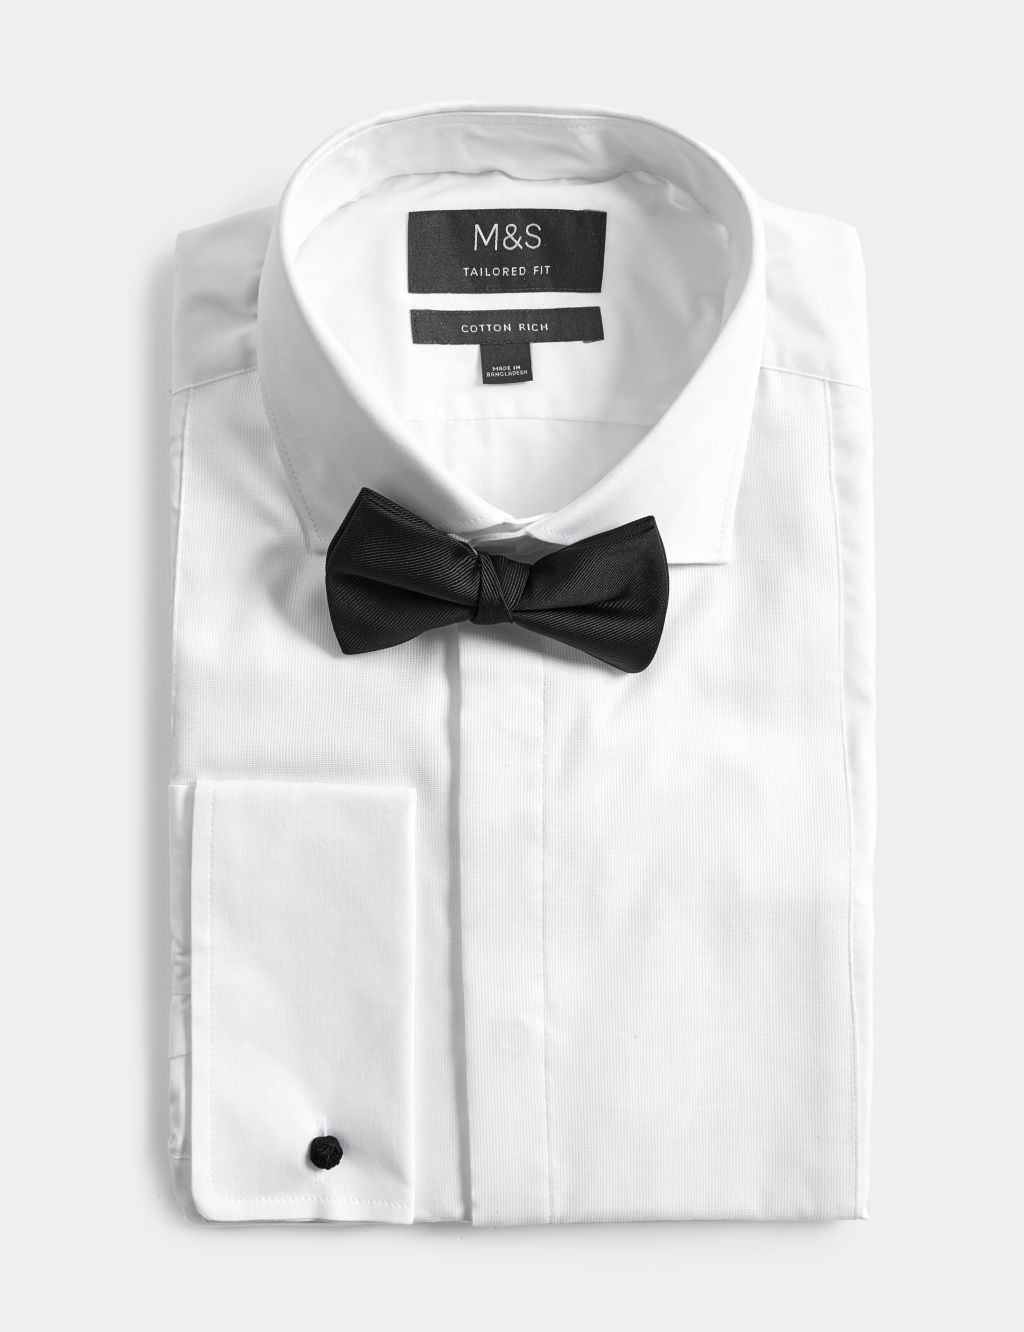 Tailored Fit Dress Shirt with Bow Tie image 2